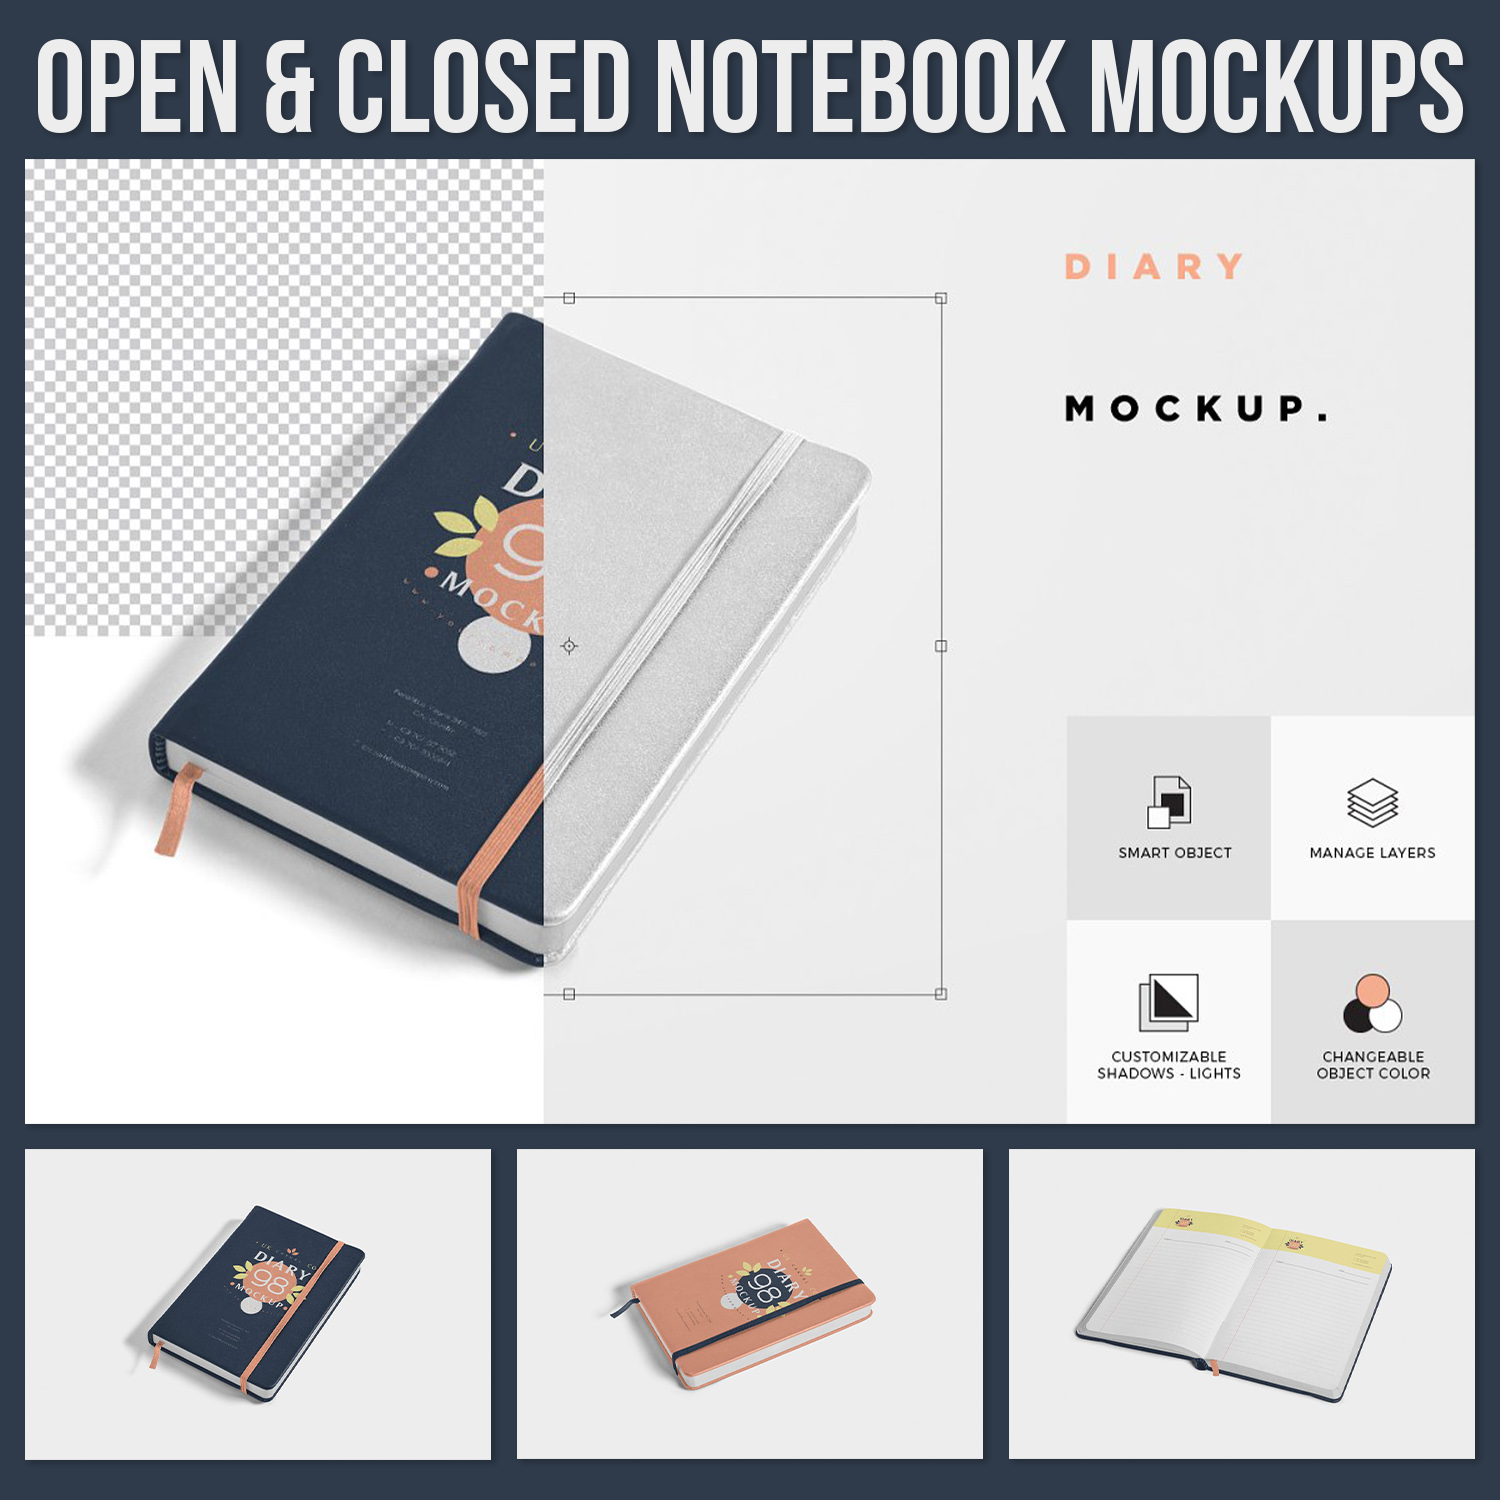 Open & Closed Notebook Mockups.